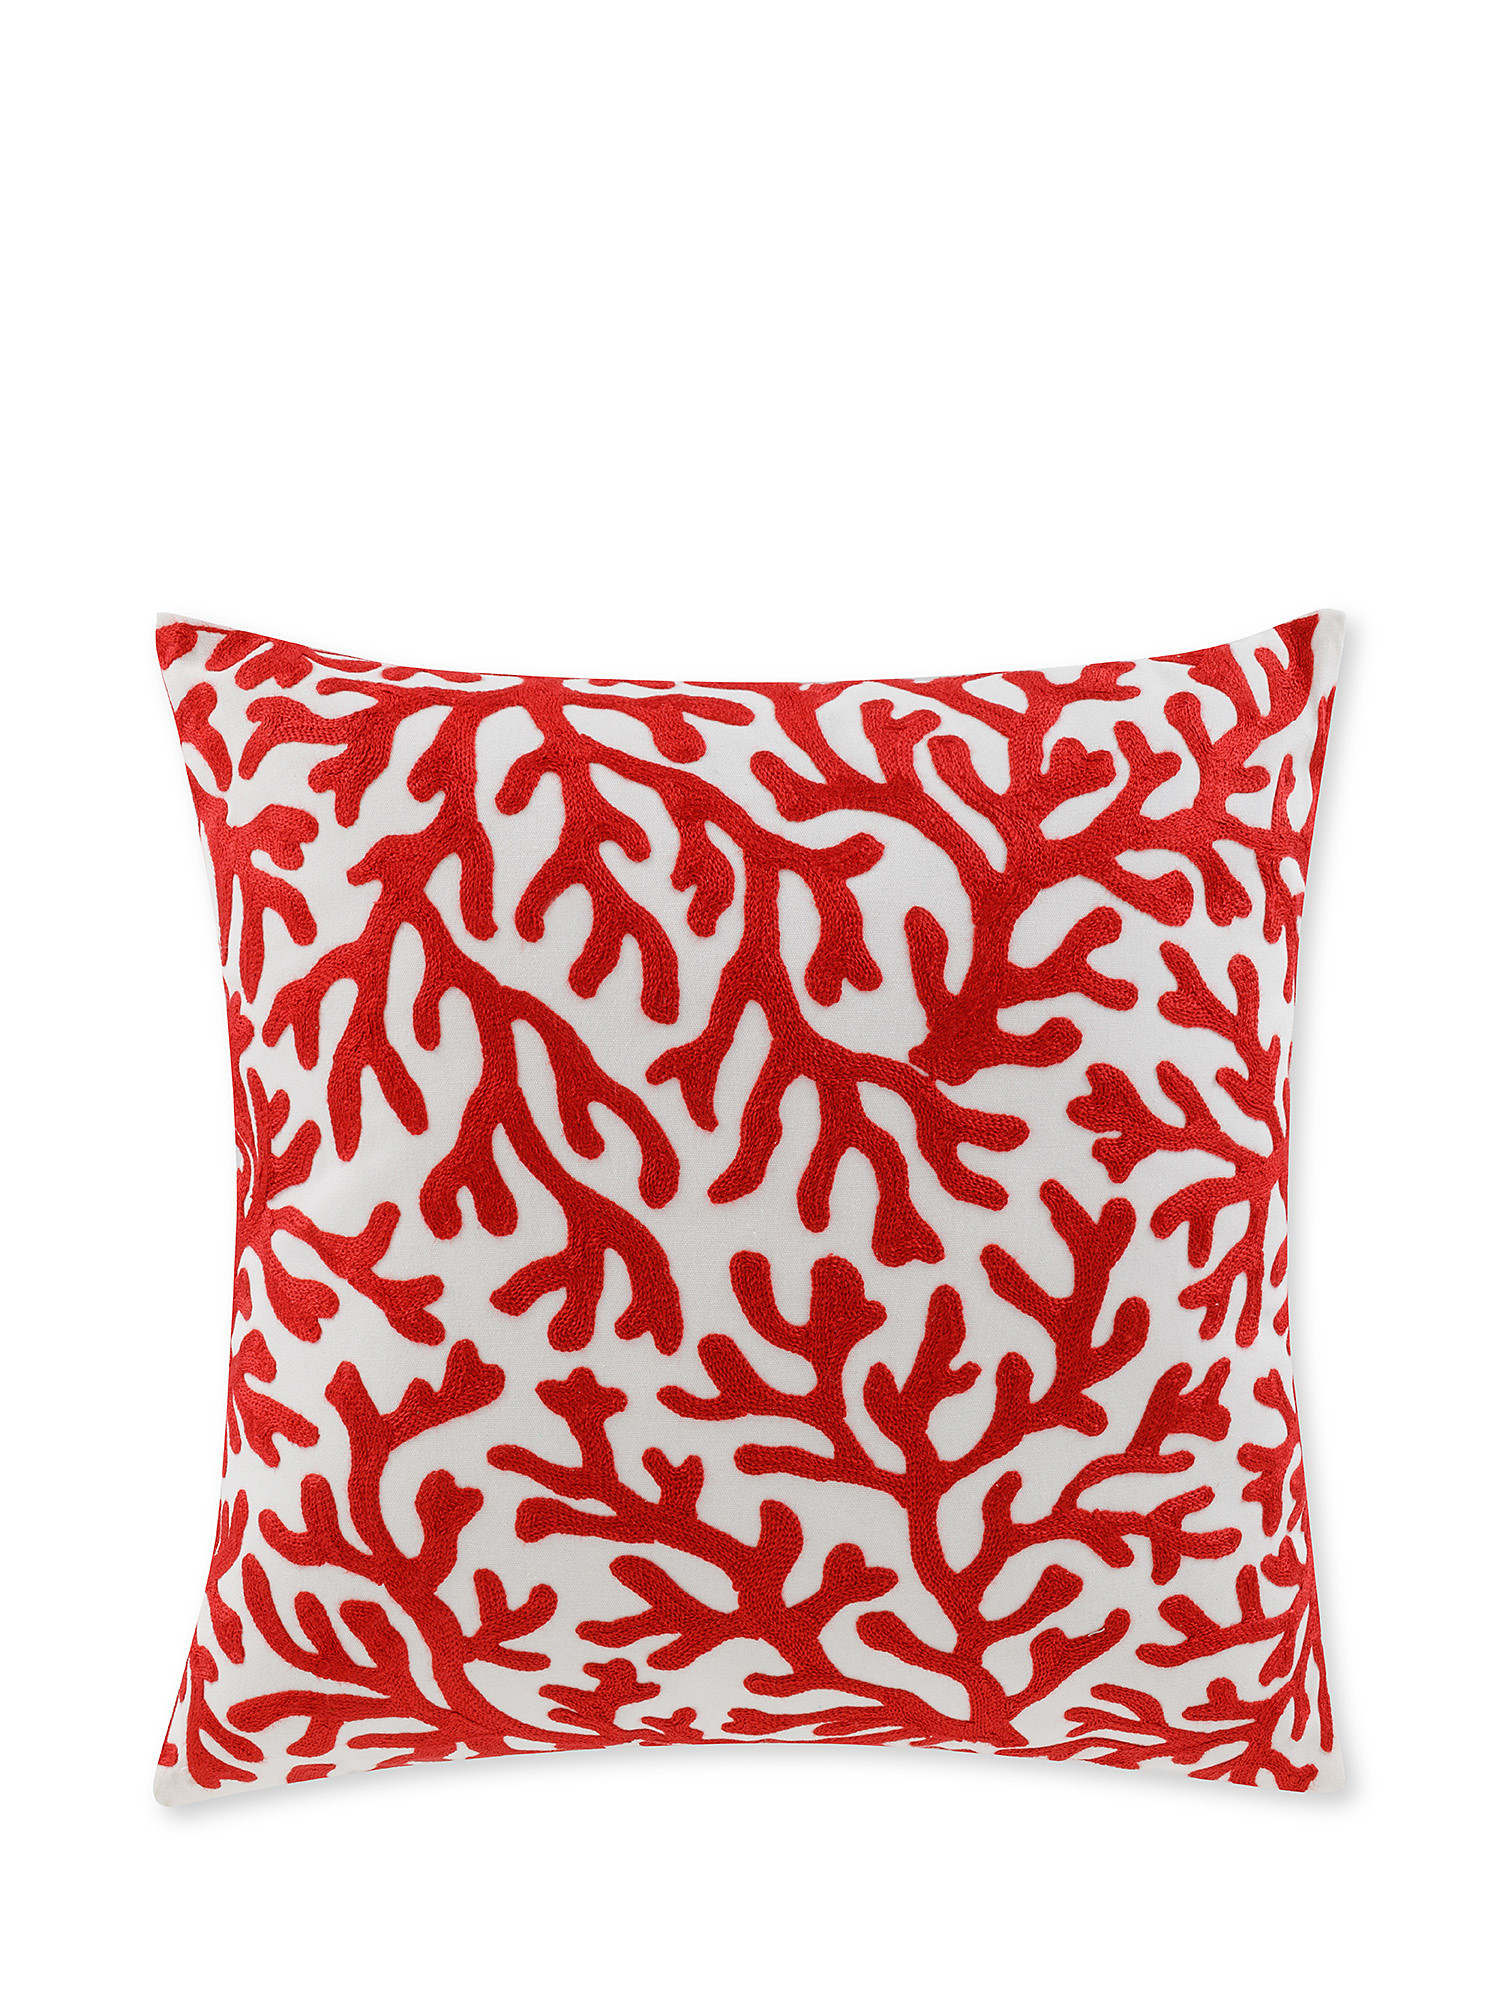 Coral embroidery cushion 45x45cm, Red, large image number 0